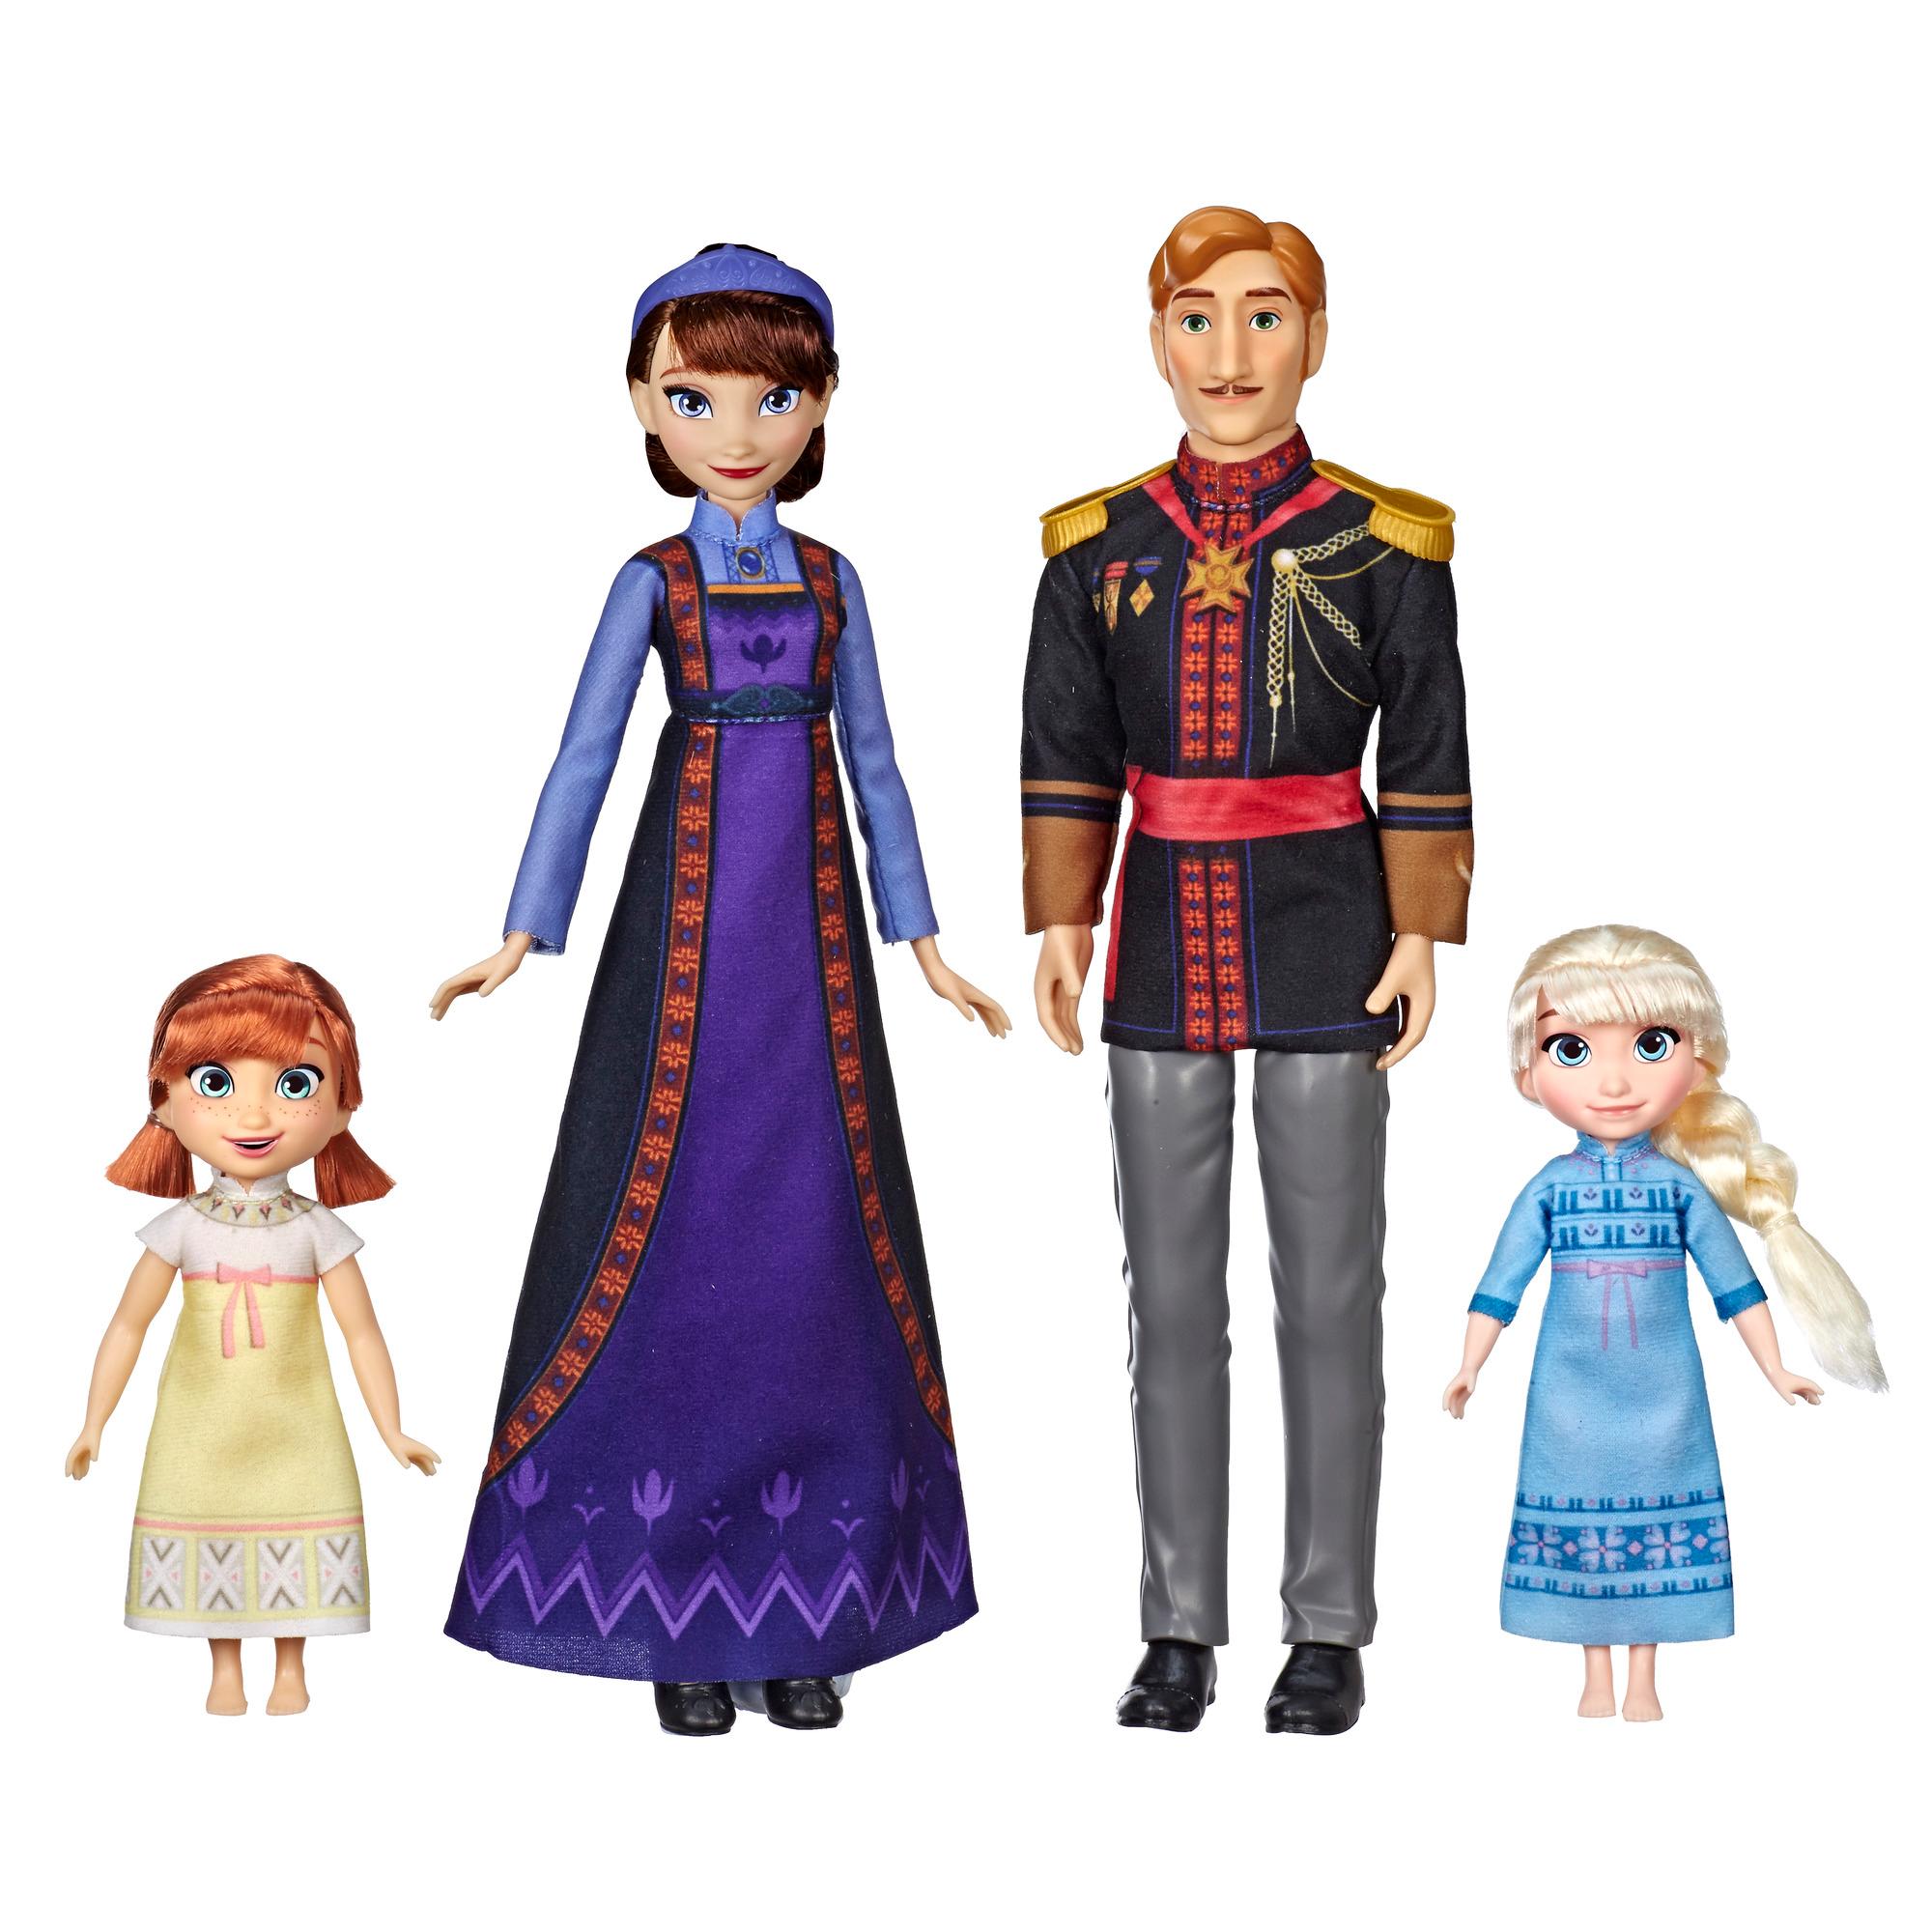 Disney Frozen 2 Arendelle Royal Family Fashion Doll Set with Toddler Anna and Elsa Dolls, King Agnarr and Queen Iduna